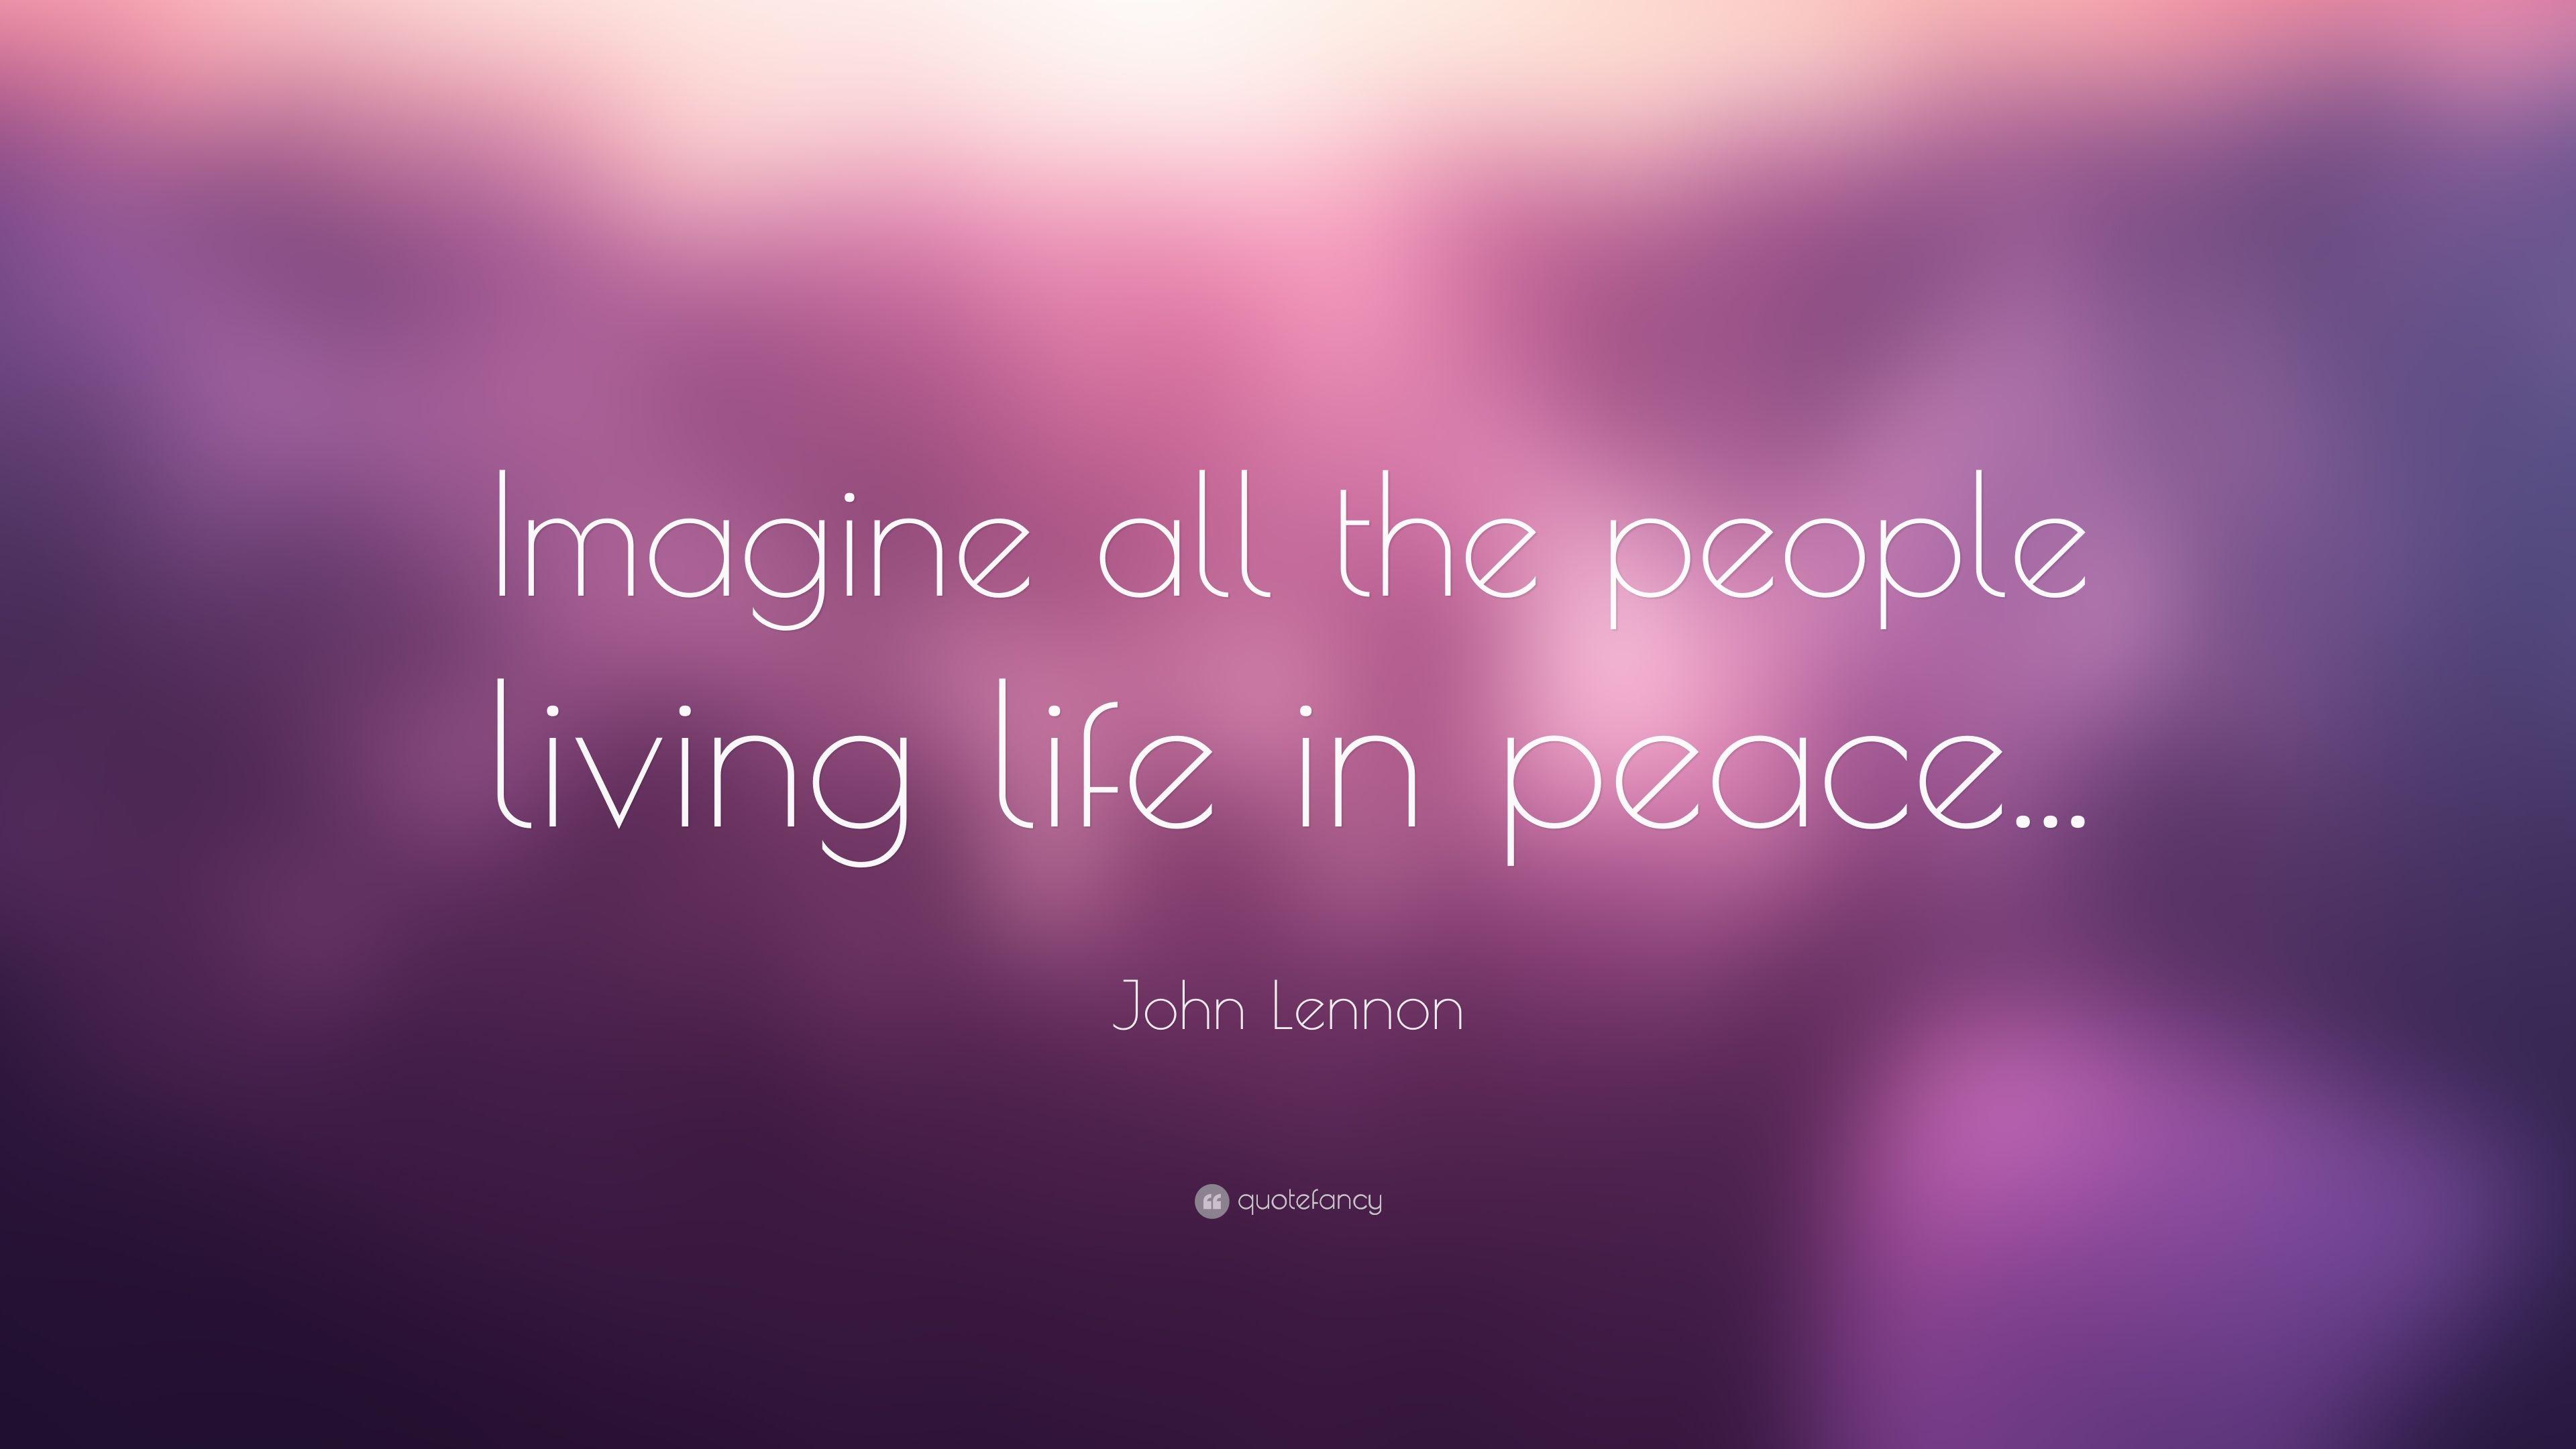 John Lennon Quote: “Imagine all the people living life in peace